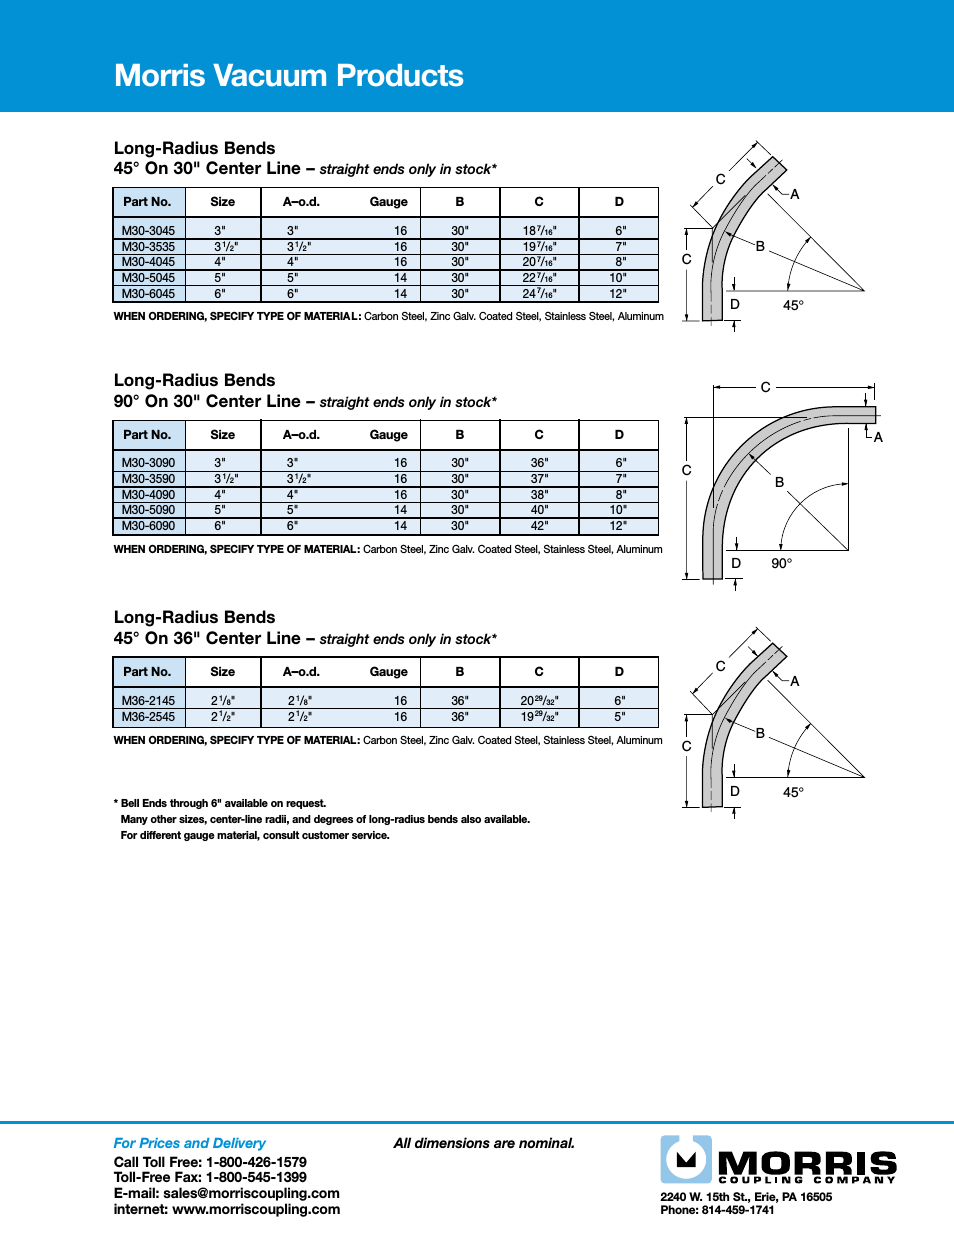 Vacuum Products - Long-Radius Bends 45 On 36 Center Line